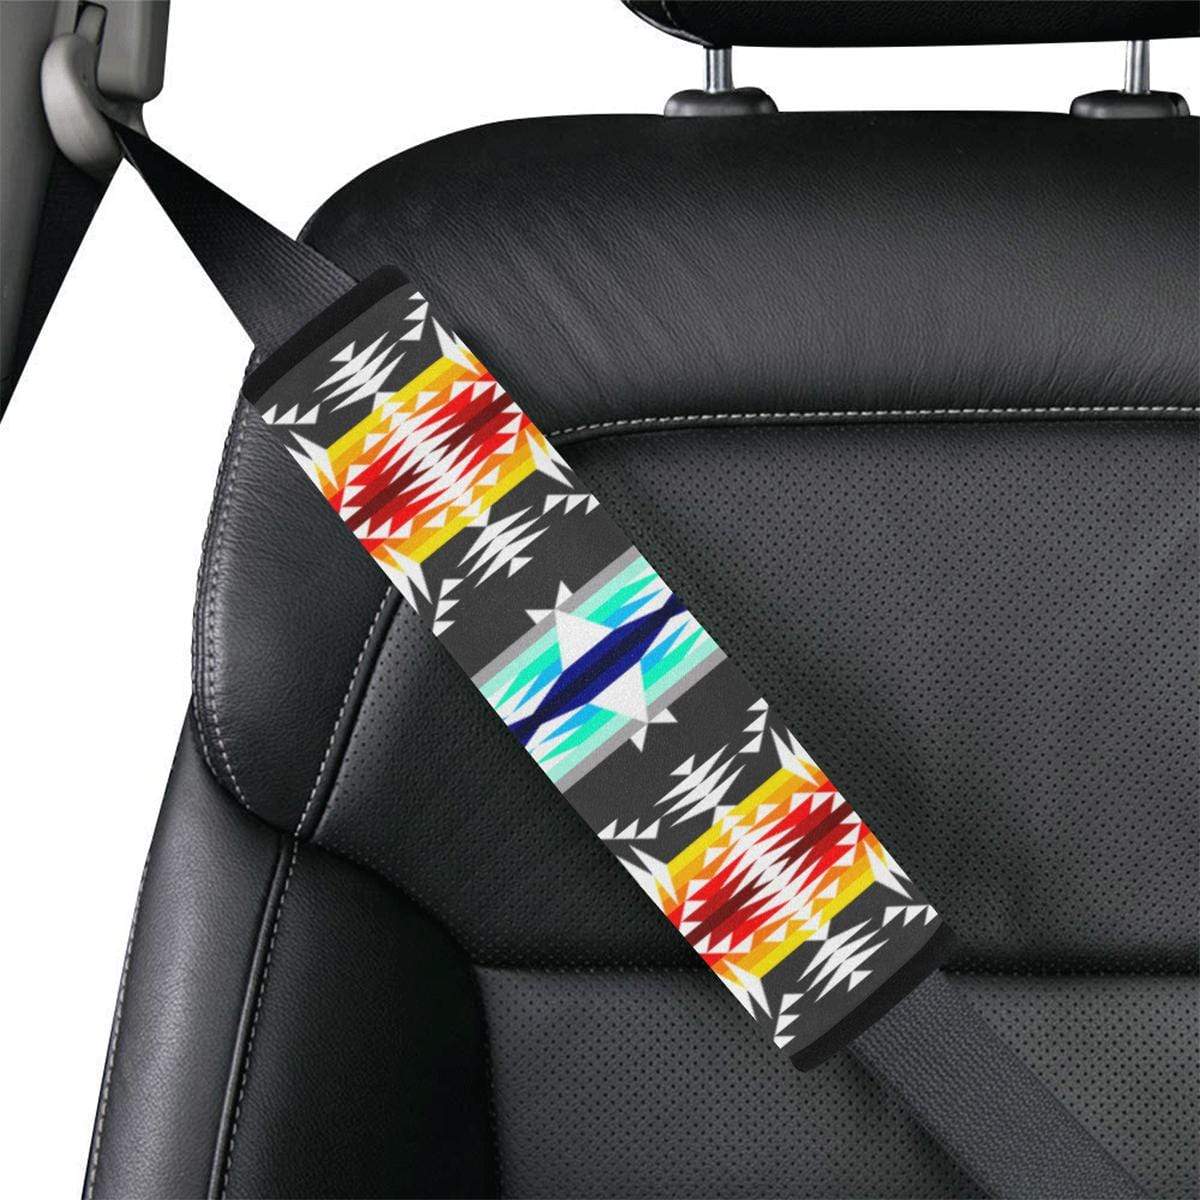 Between the Mountains Gray Car Seat Belt Cover 7''x12.6'' Car Seat Belt Cover 7''x12.6'' e-joyer 